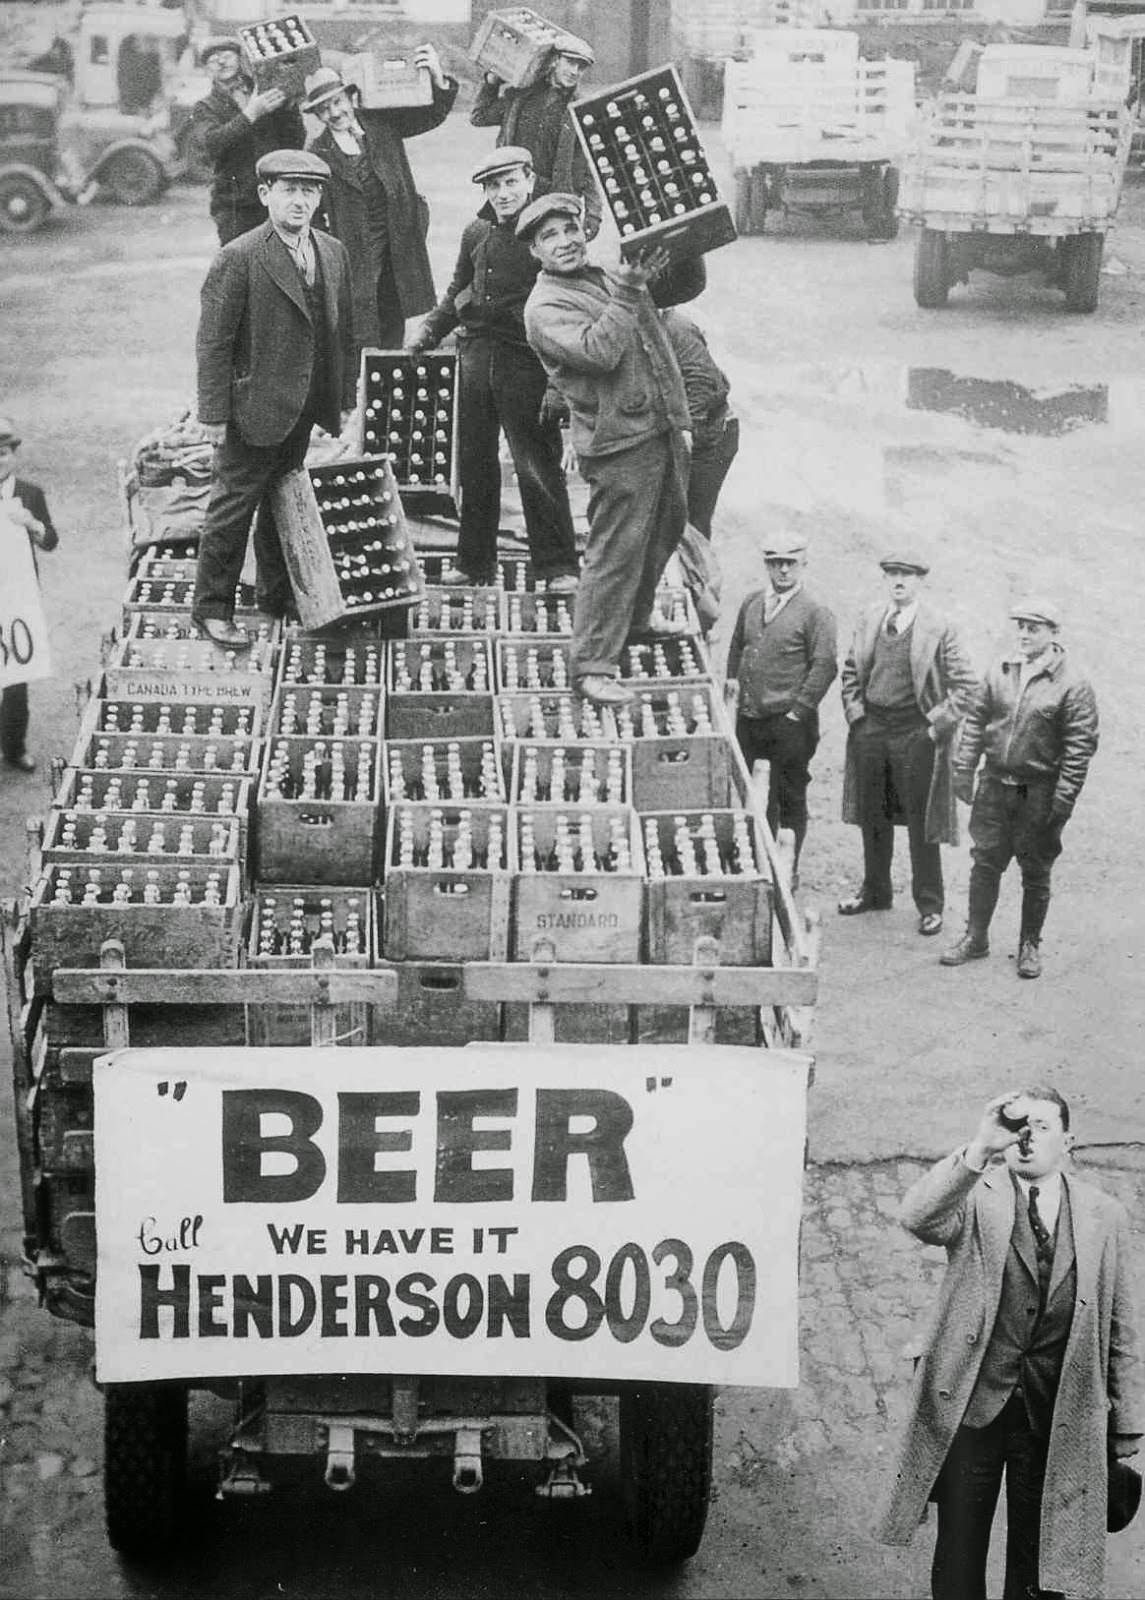 Man enjoying the End of Prohibition in Ohio, December 1933